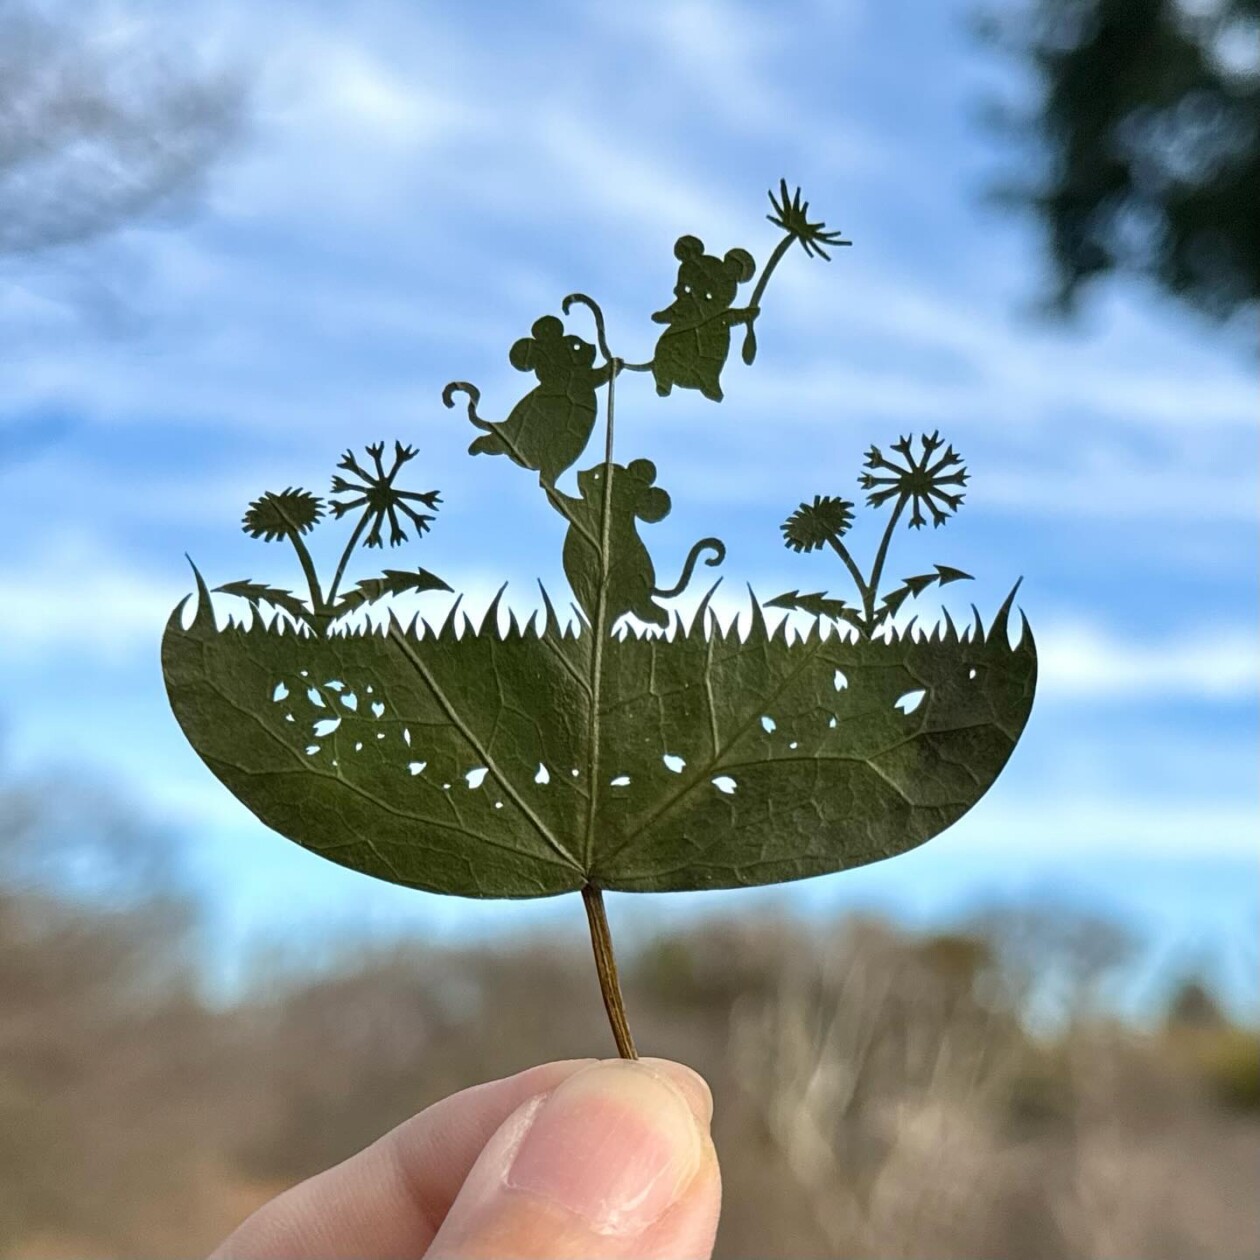 Japanese Artist Lito Meticulously Hand Carves Intricate Scenes Into Leaves (1)